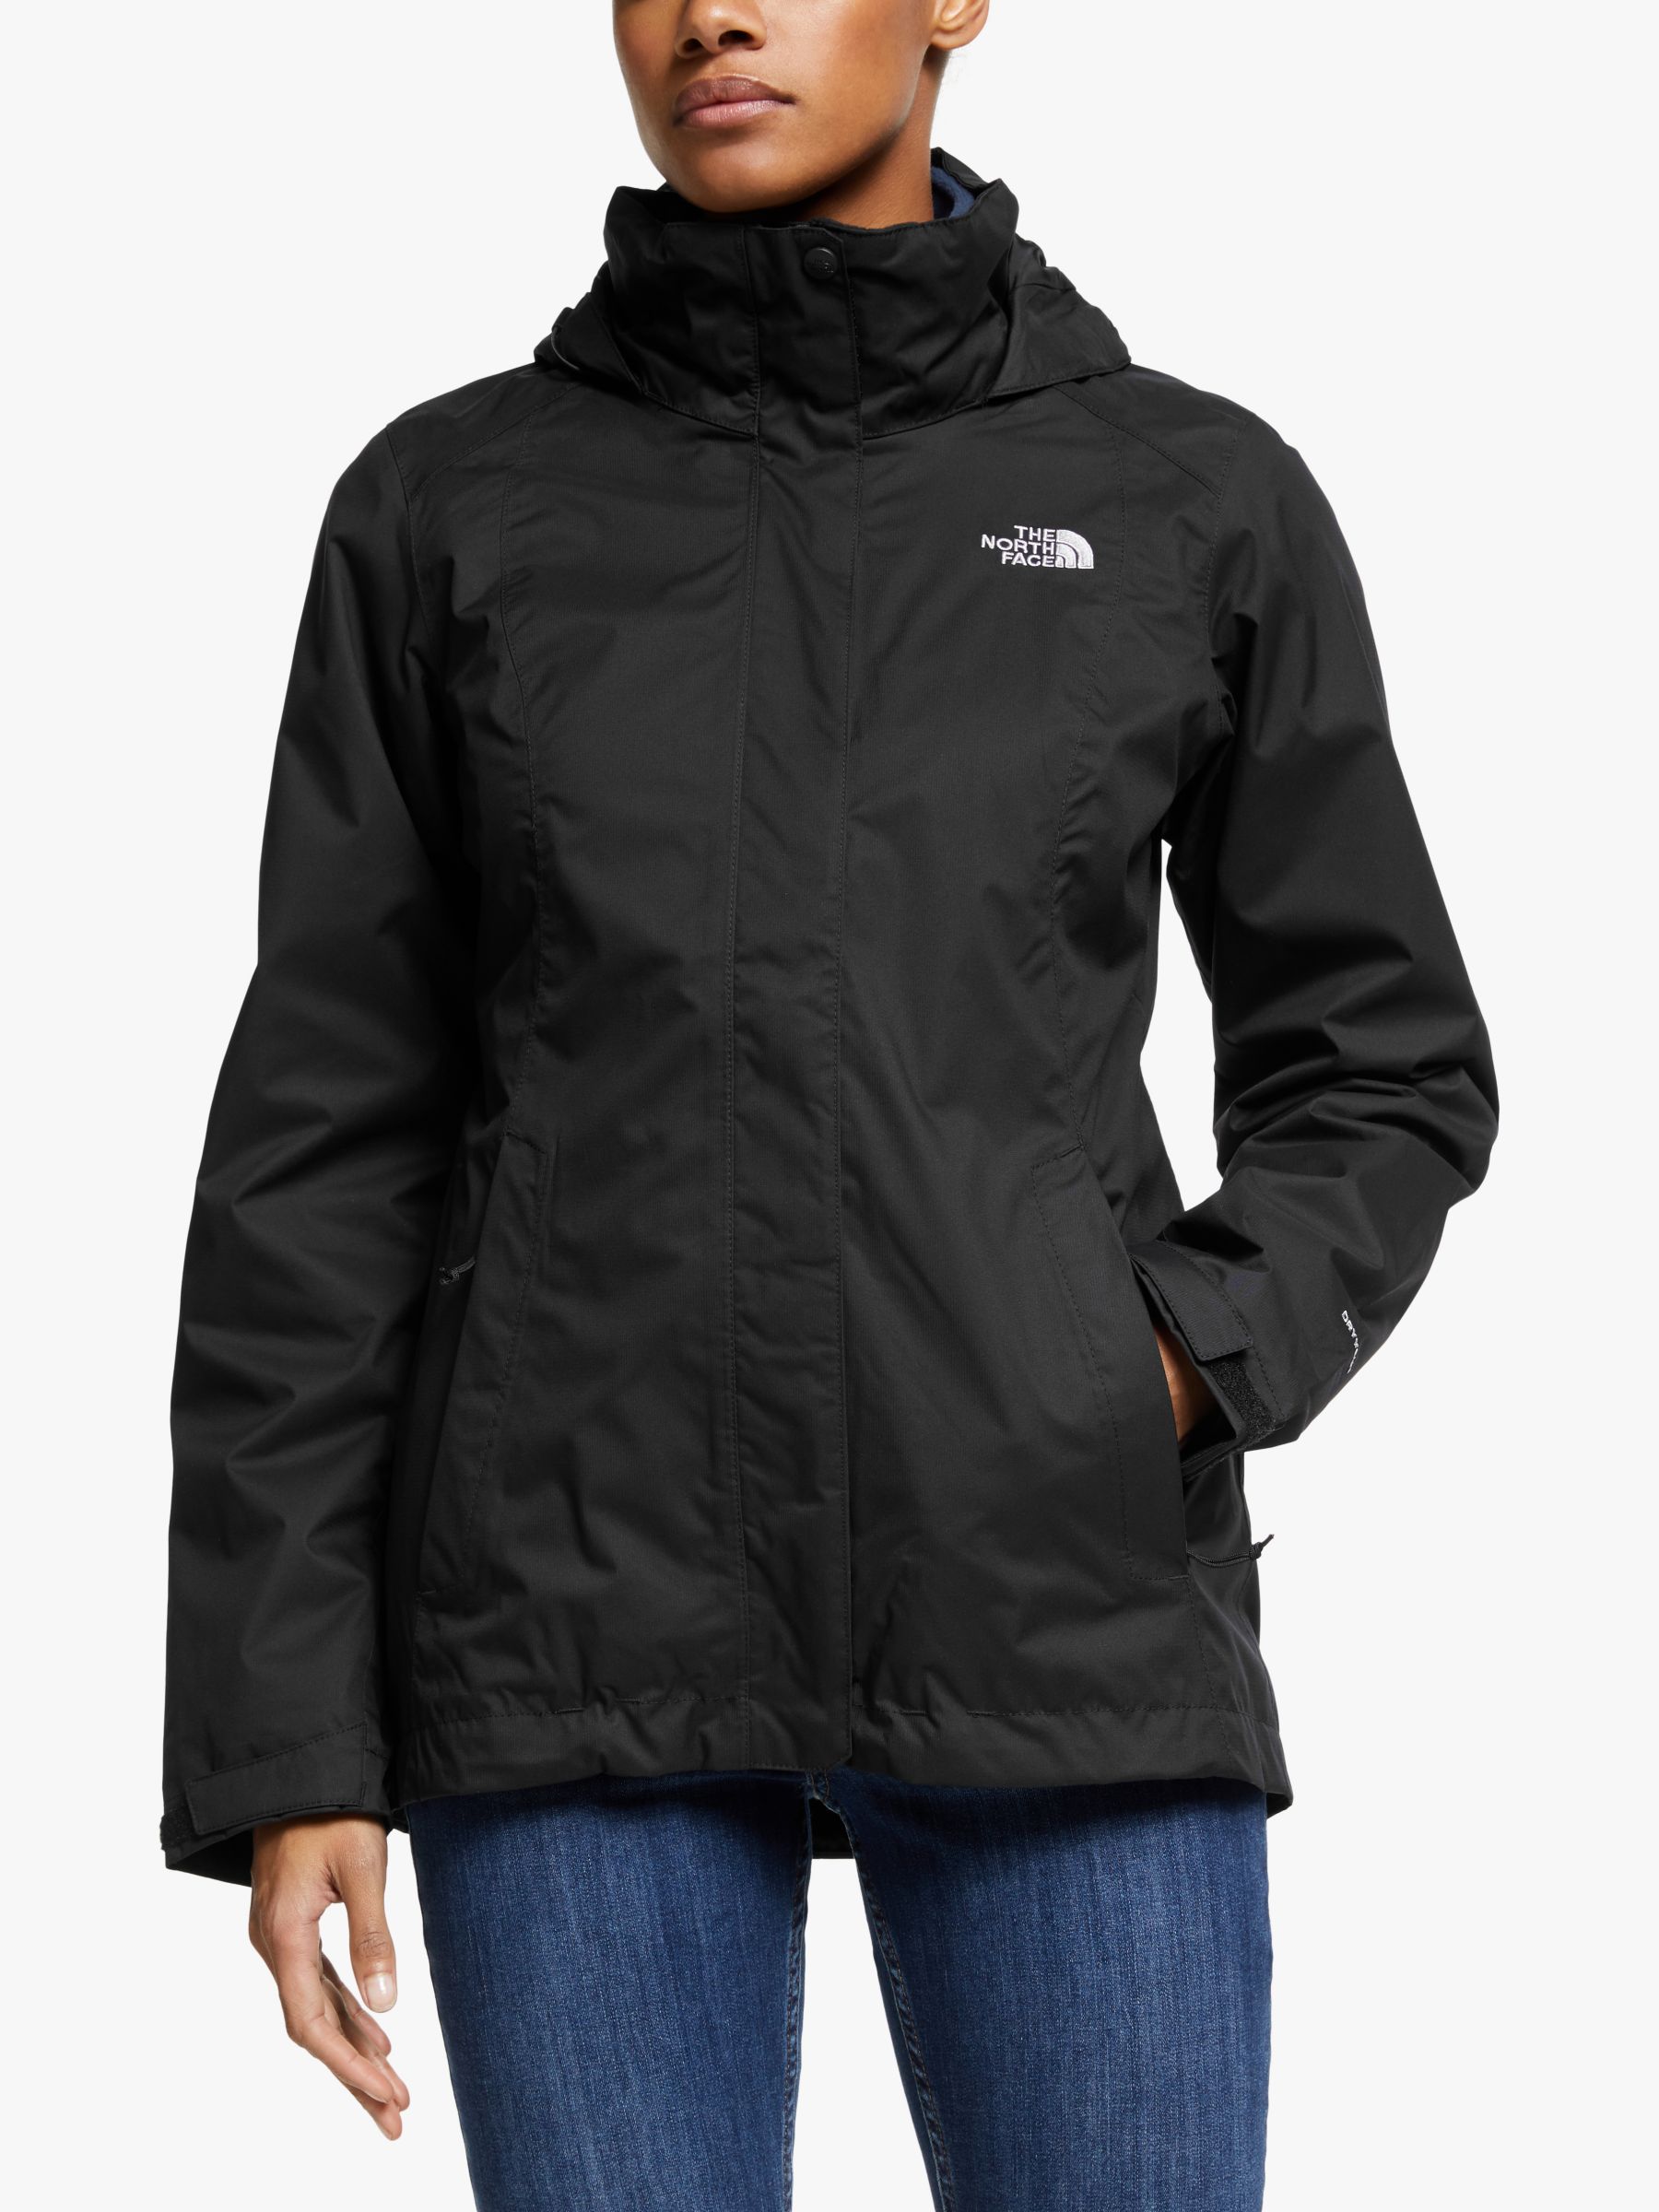 north face 3in1